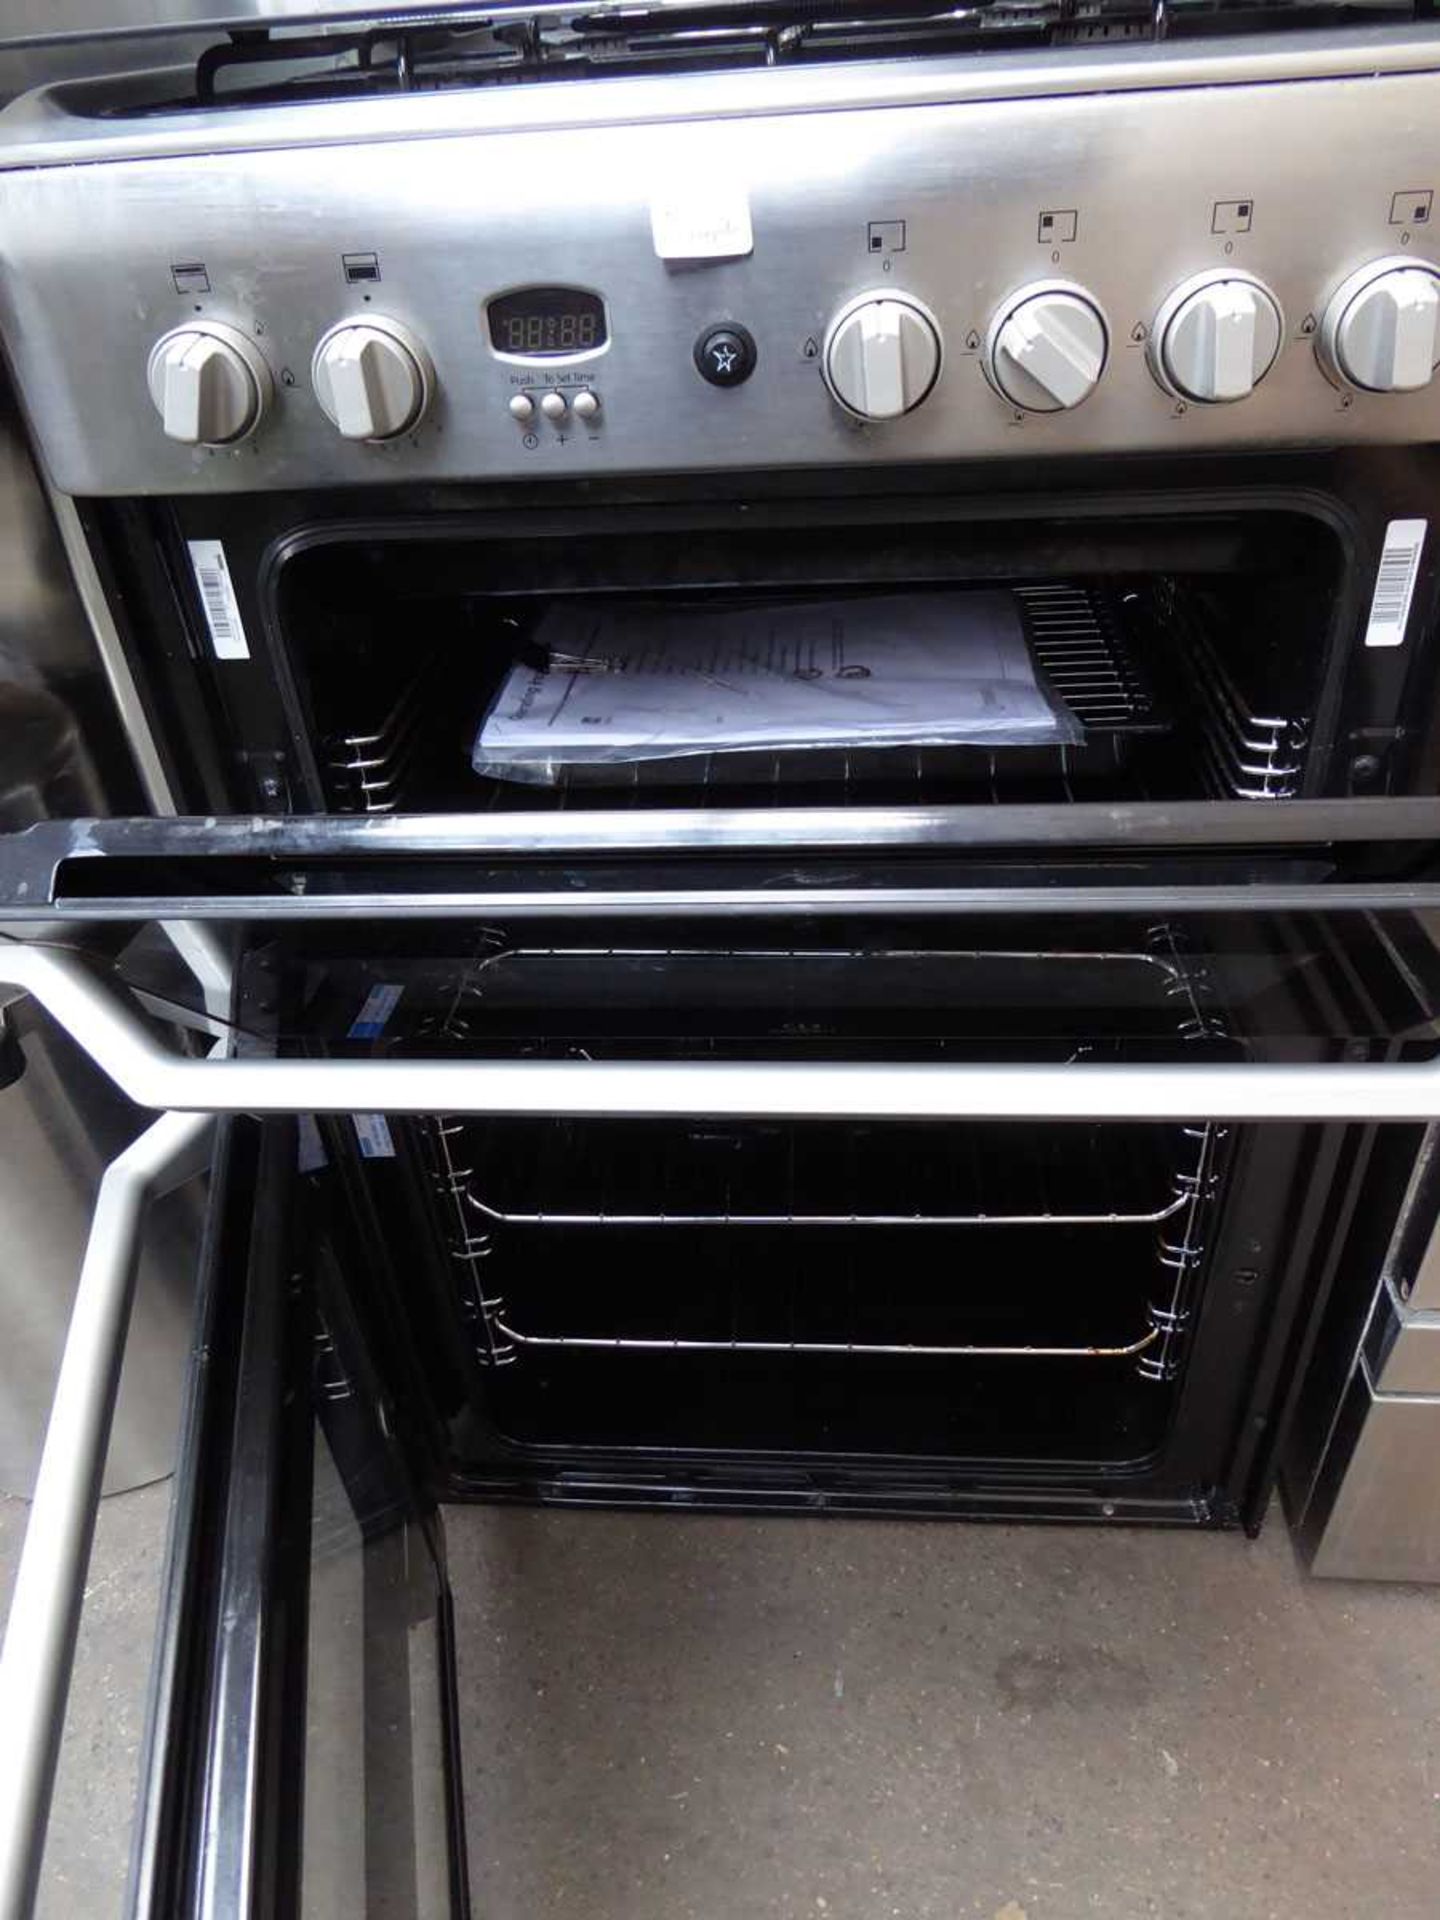 60cm gas domestic Indesit cooker with 4 burner top and and 2 ovens under - Bild 2 aus 2